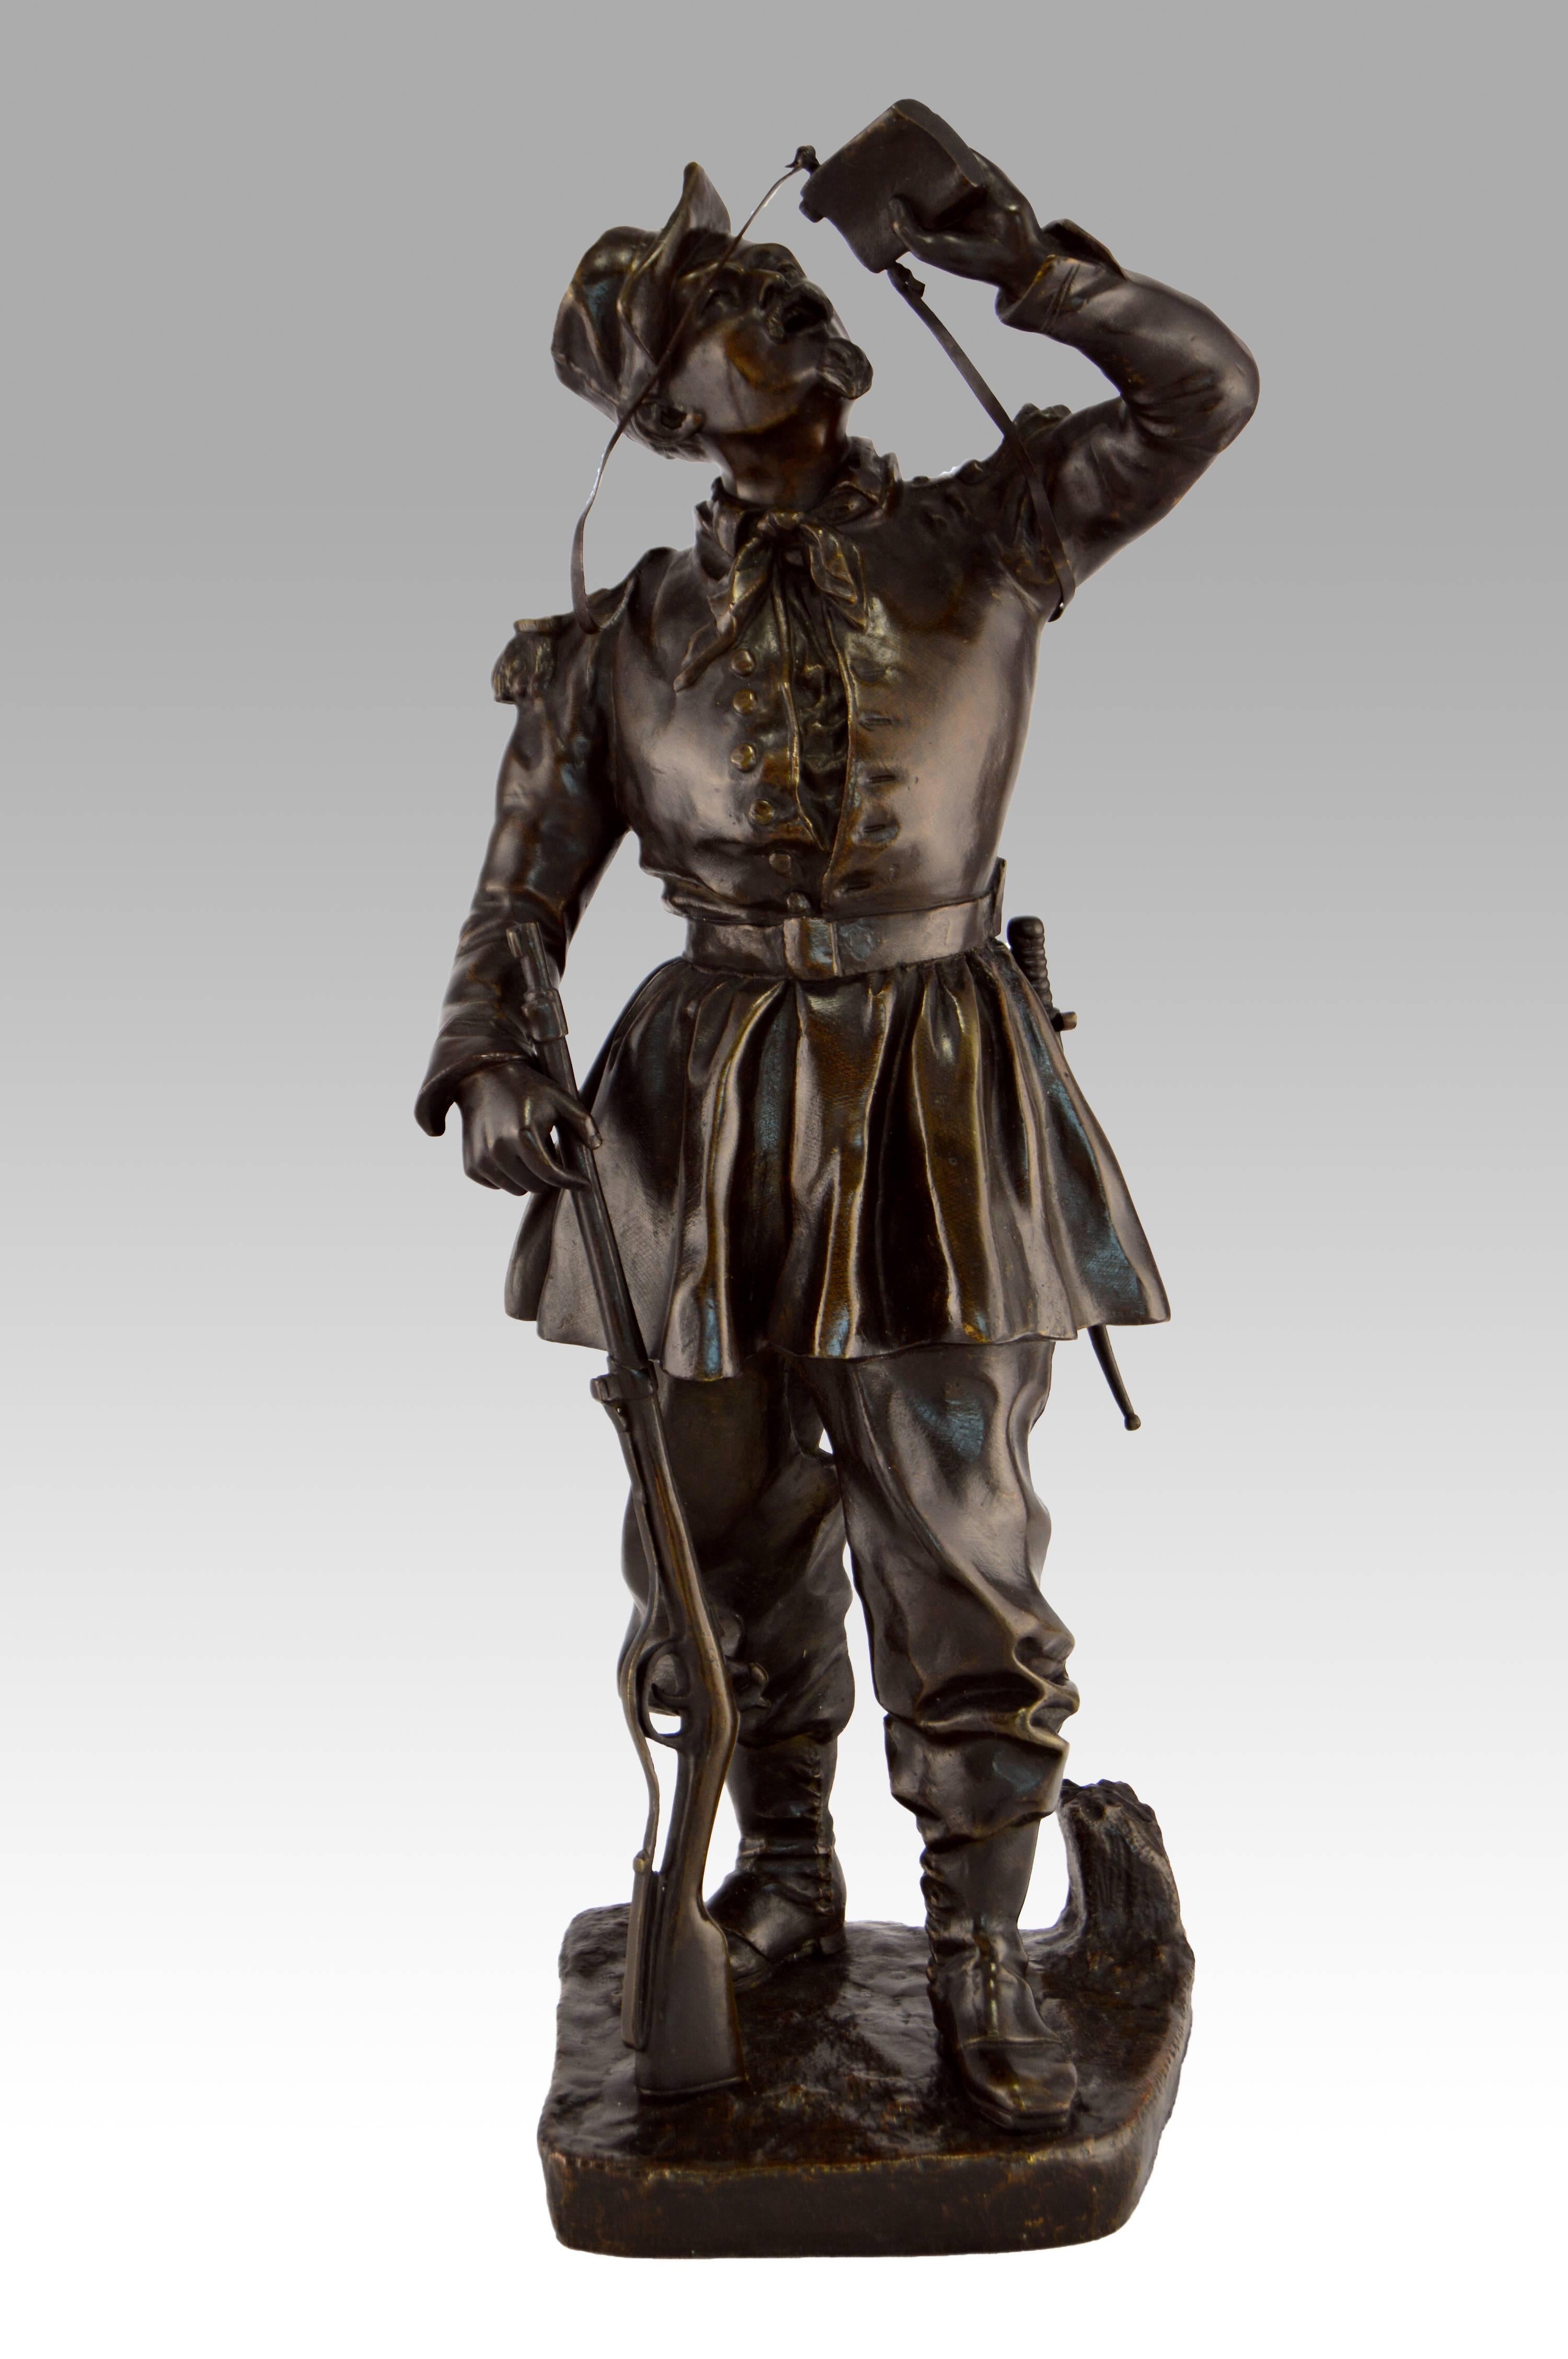 19th Century French bronze sculpture of a soldier